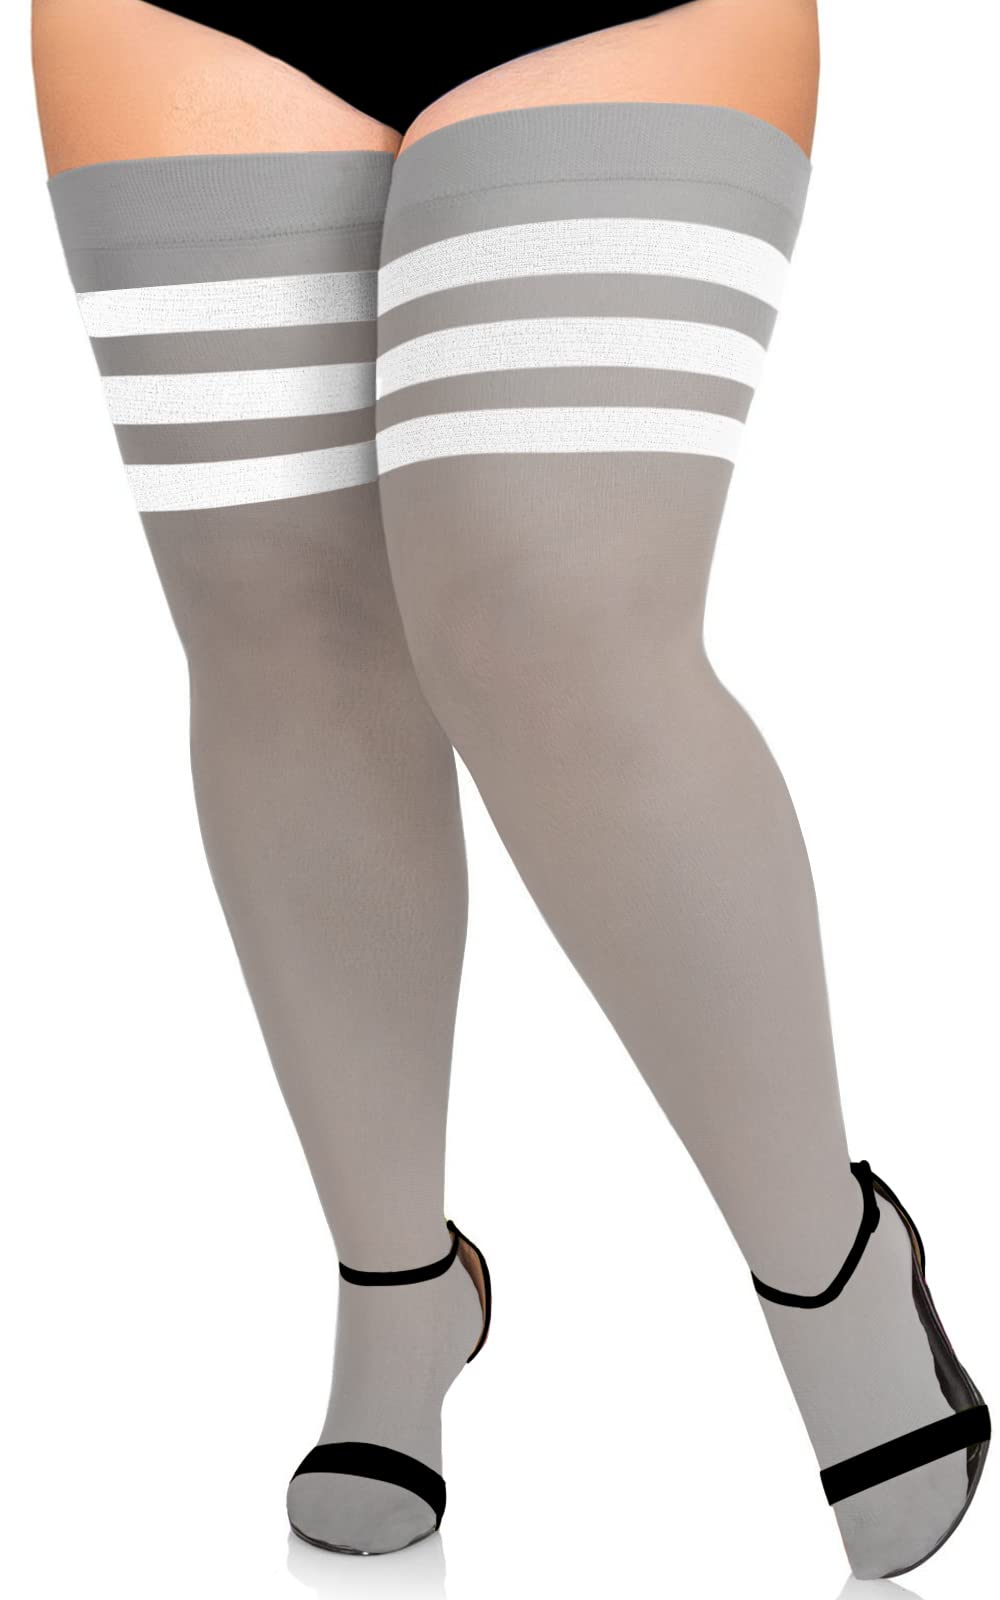 Extra Long Womens Opaque Striped Over Knee High Stockings-Limestone Grey & White - Moon Wood